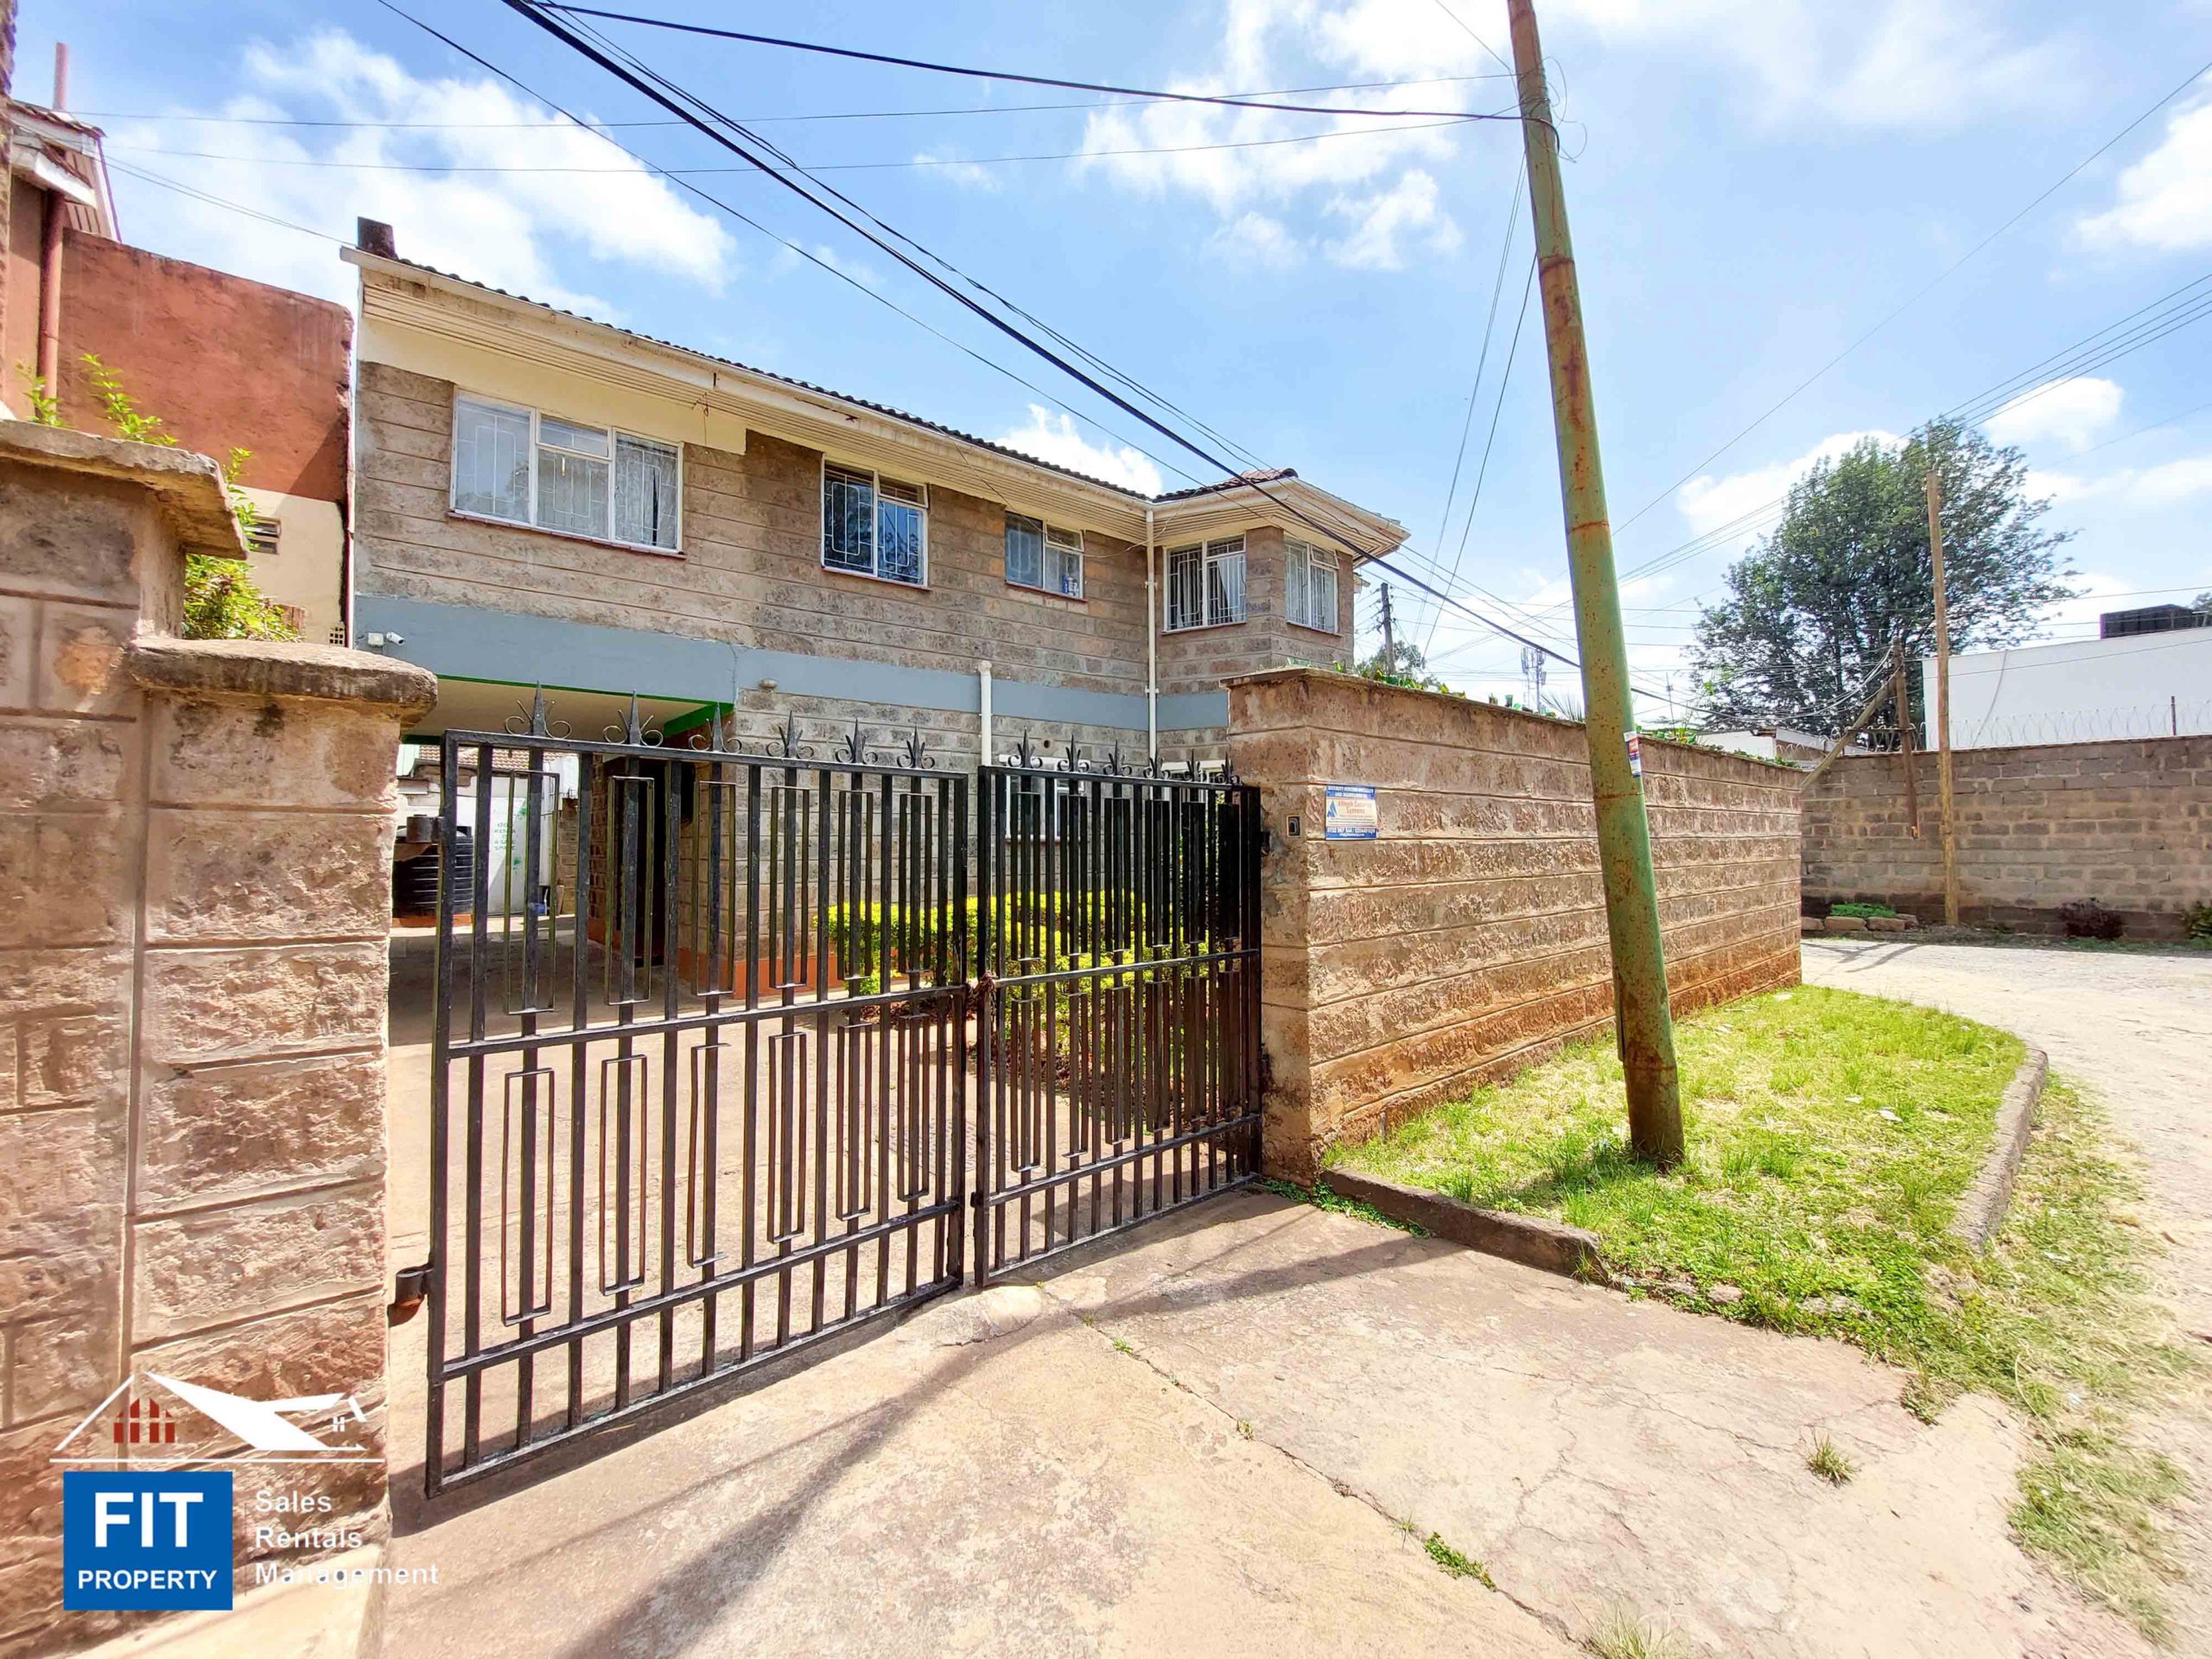 6 Bed Commercial House for Rent just on Lenana Close. Ideally suited for private offices, NGOs and more. USD 1650/month or KES 250,000/ month FIT PROPERTY